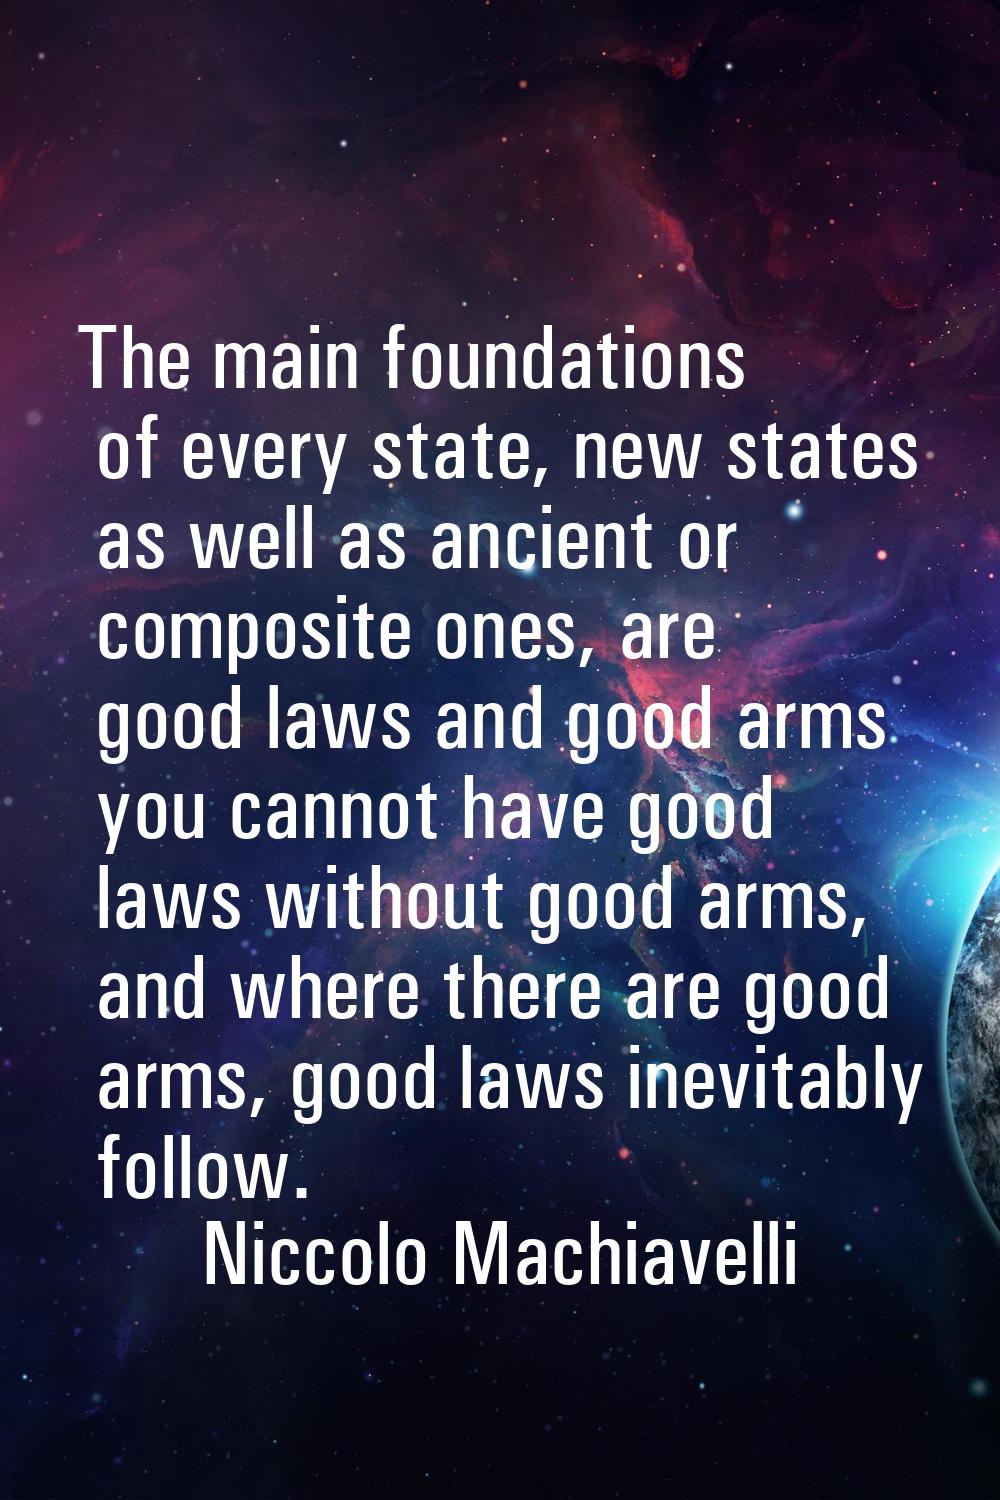 The main foundations of every state, new states as well as ancient or composite ones, are good laws